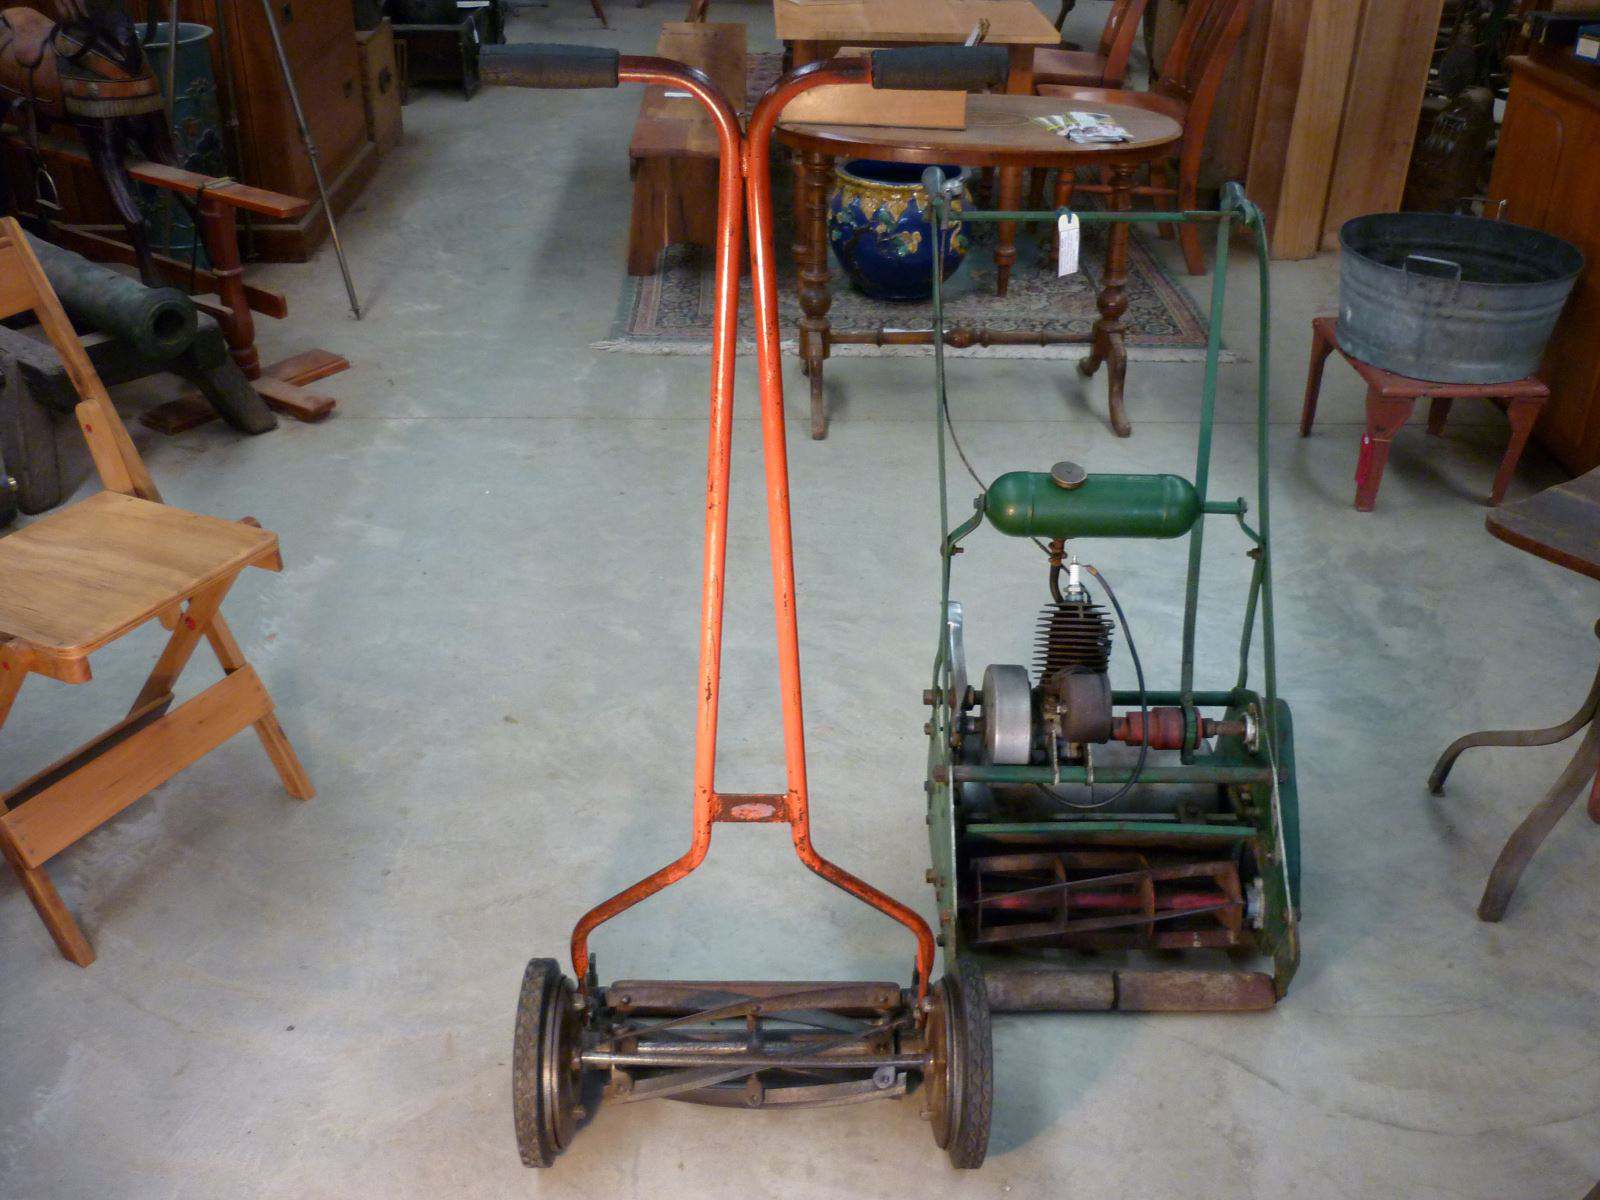 Lawn Mowers. Both Restored and in very Good Working Order